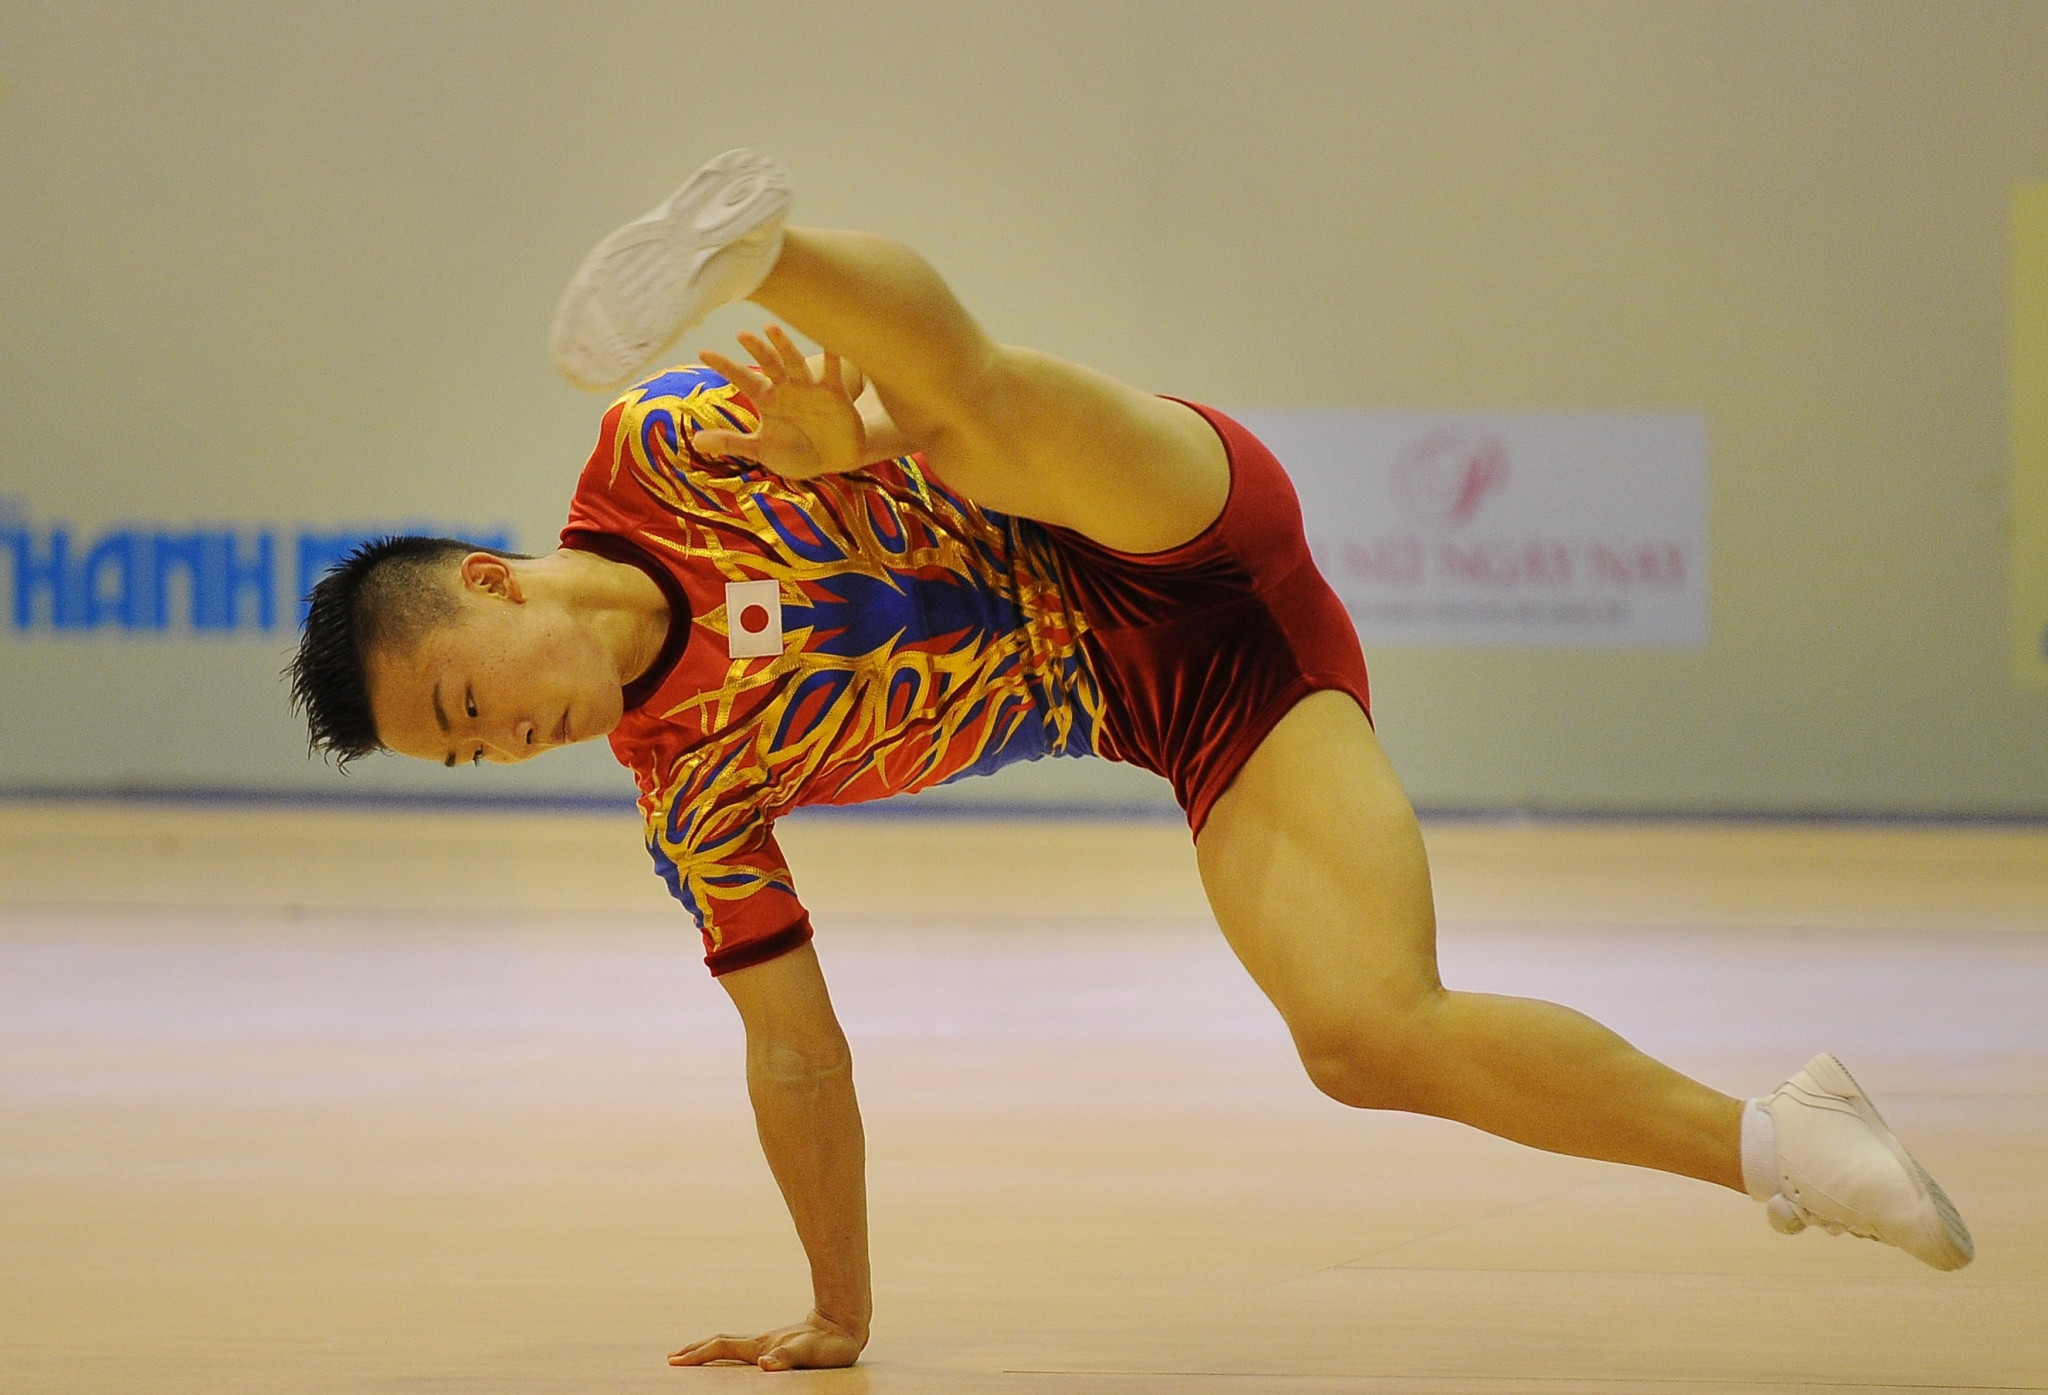 Home favourite Mizuki Saito of Japan led men's qualifying at the FIG Aerobic World Cup ©Getty Images